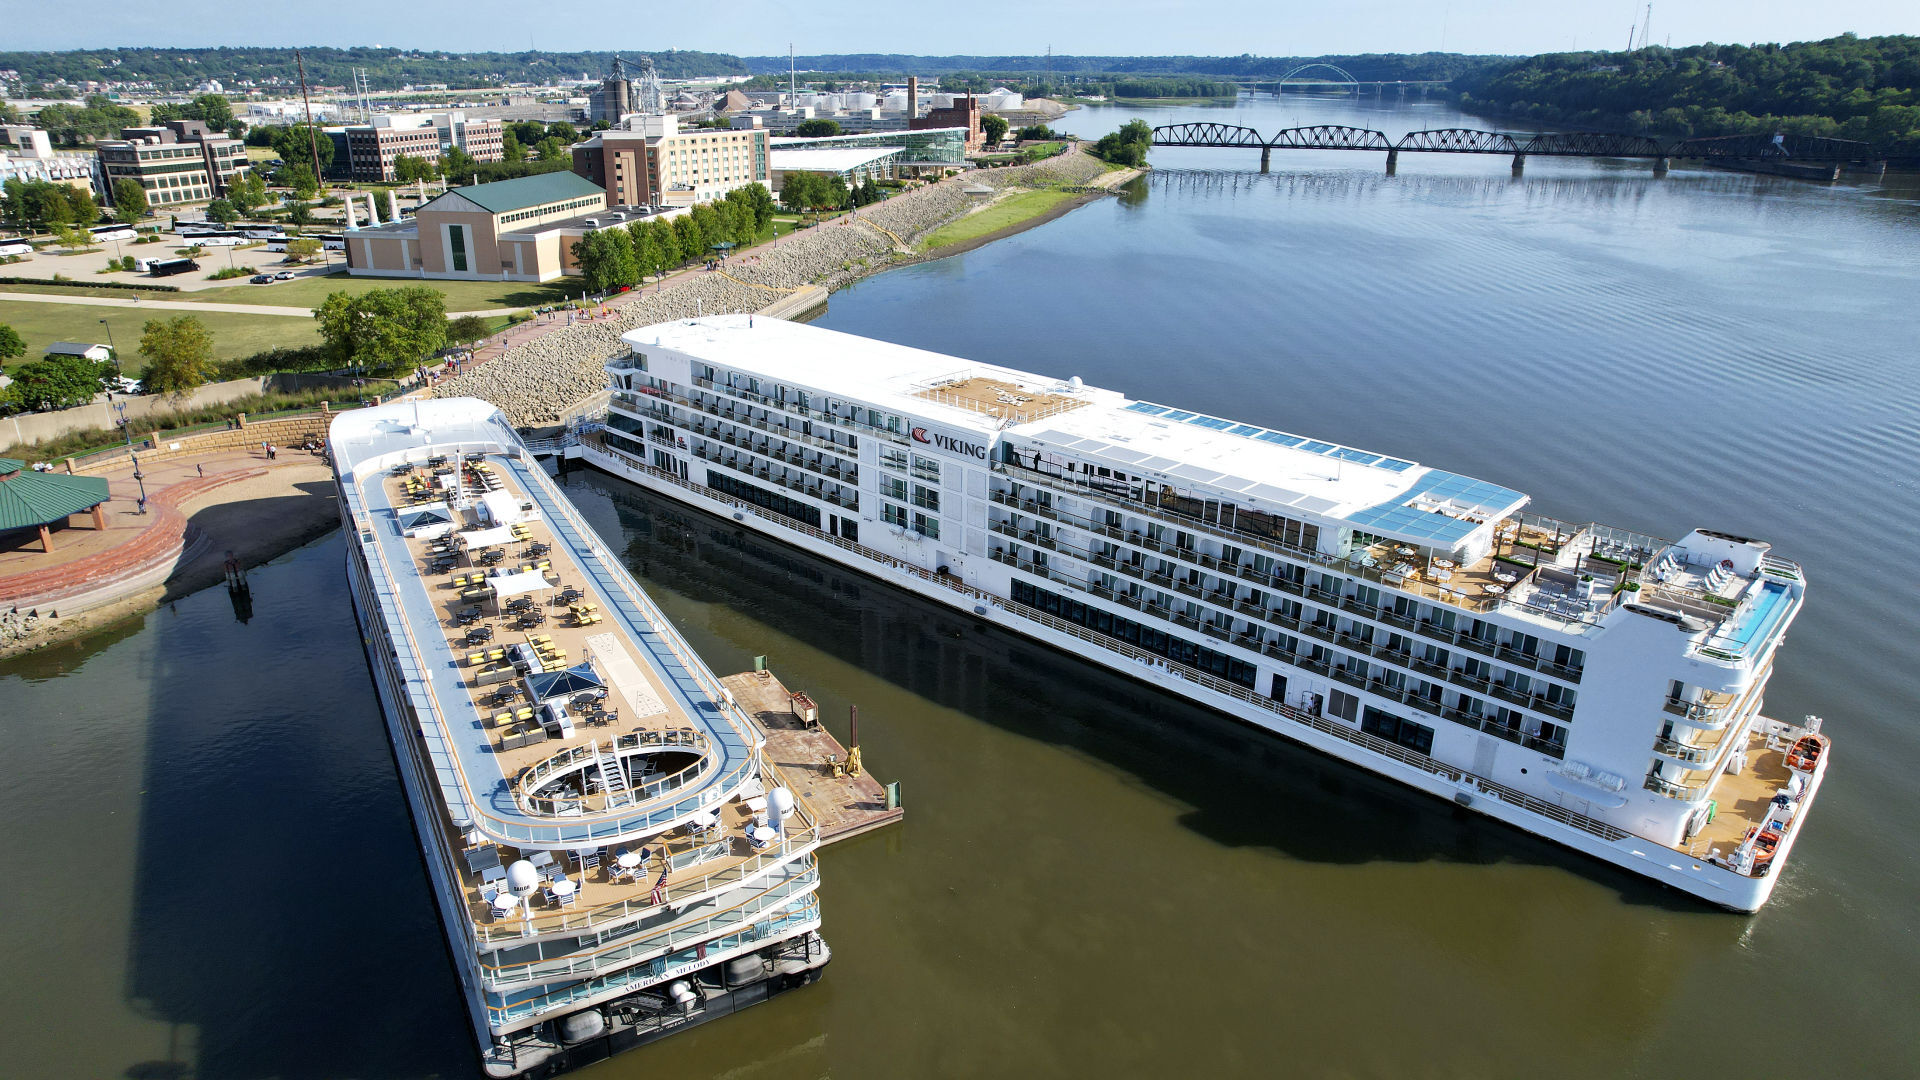 The Viking Mississippi cruise ship (right) docks at the Port of Dubuque on Tuesday, Sept. 6, 2022.    PHOTO CREDIT: Dave Kettering